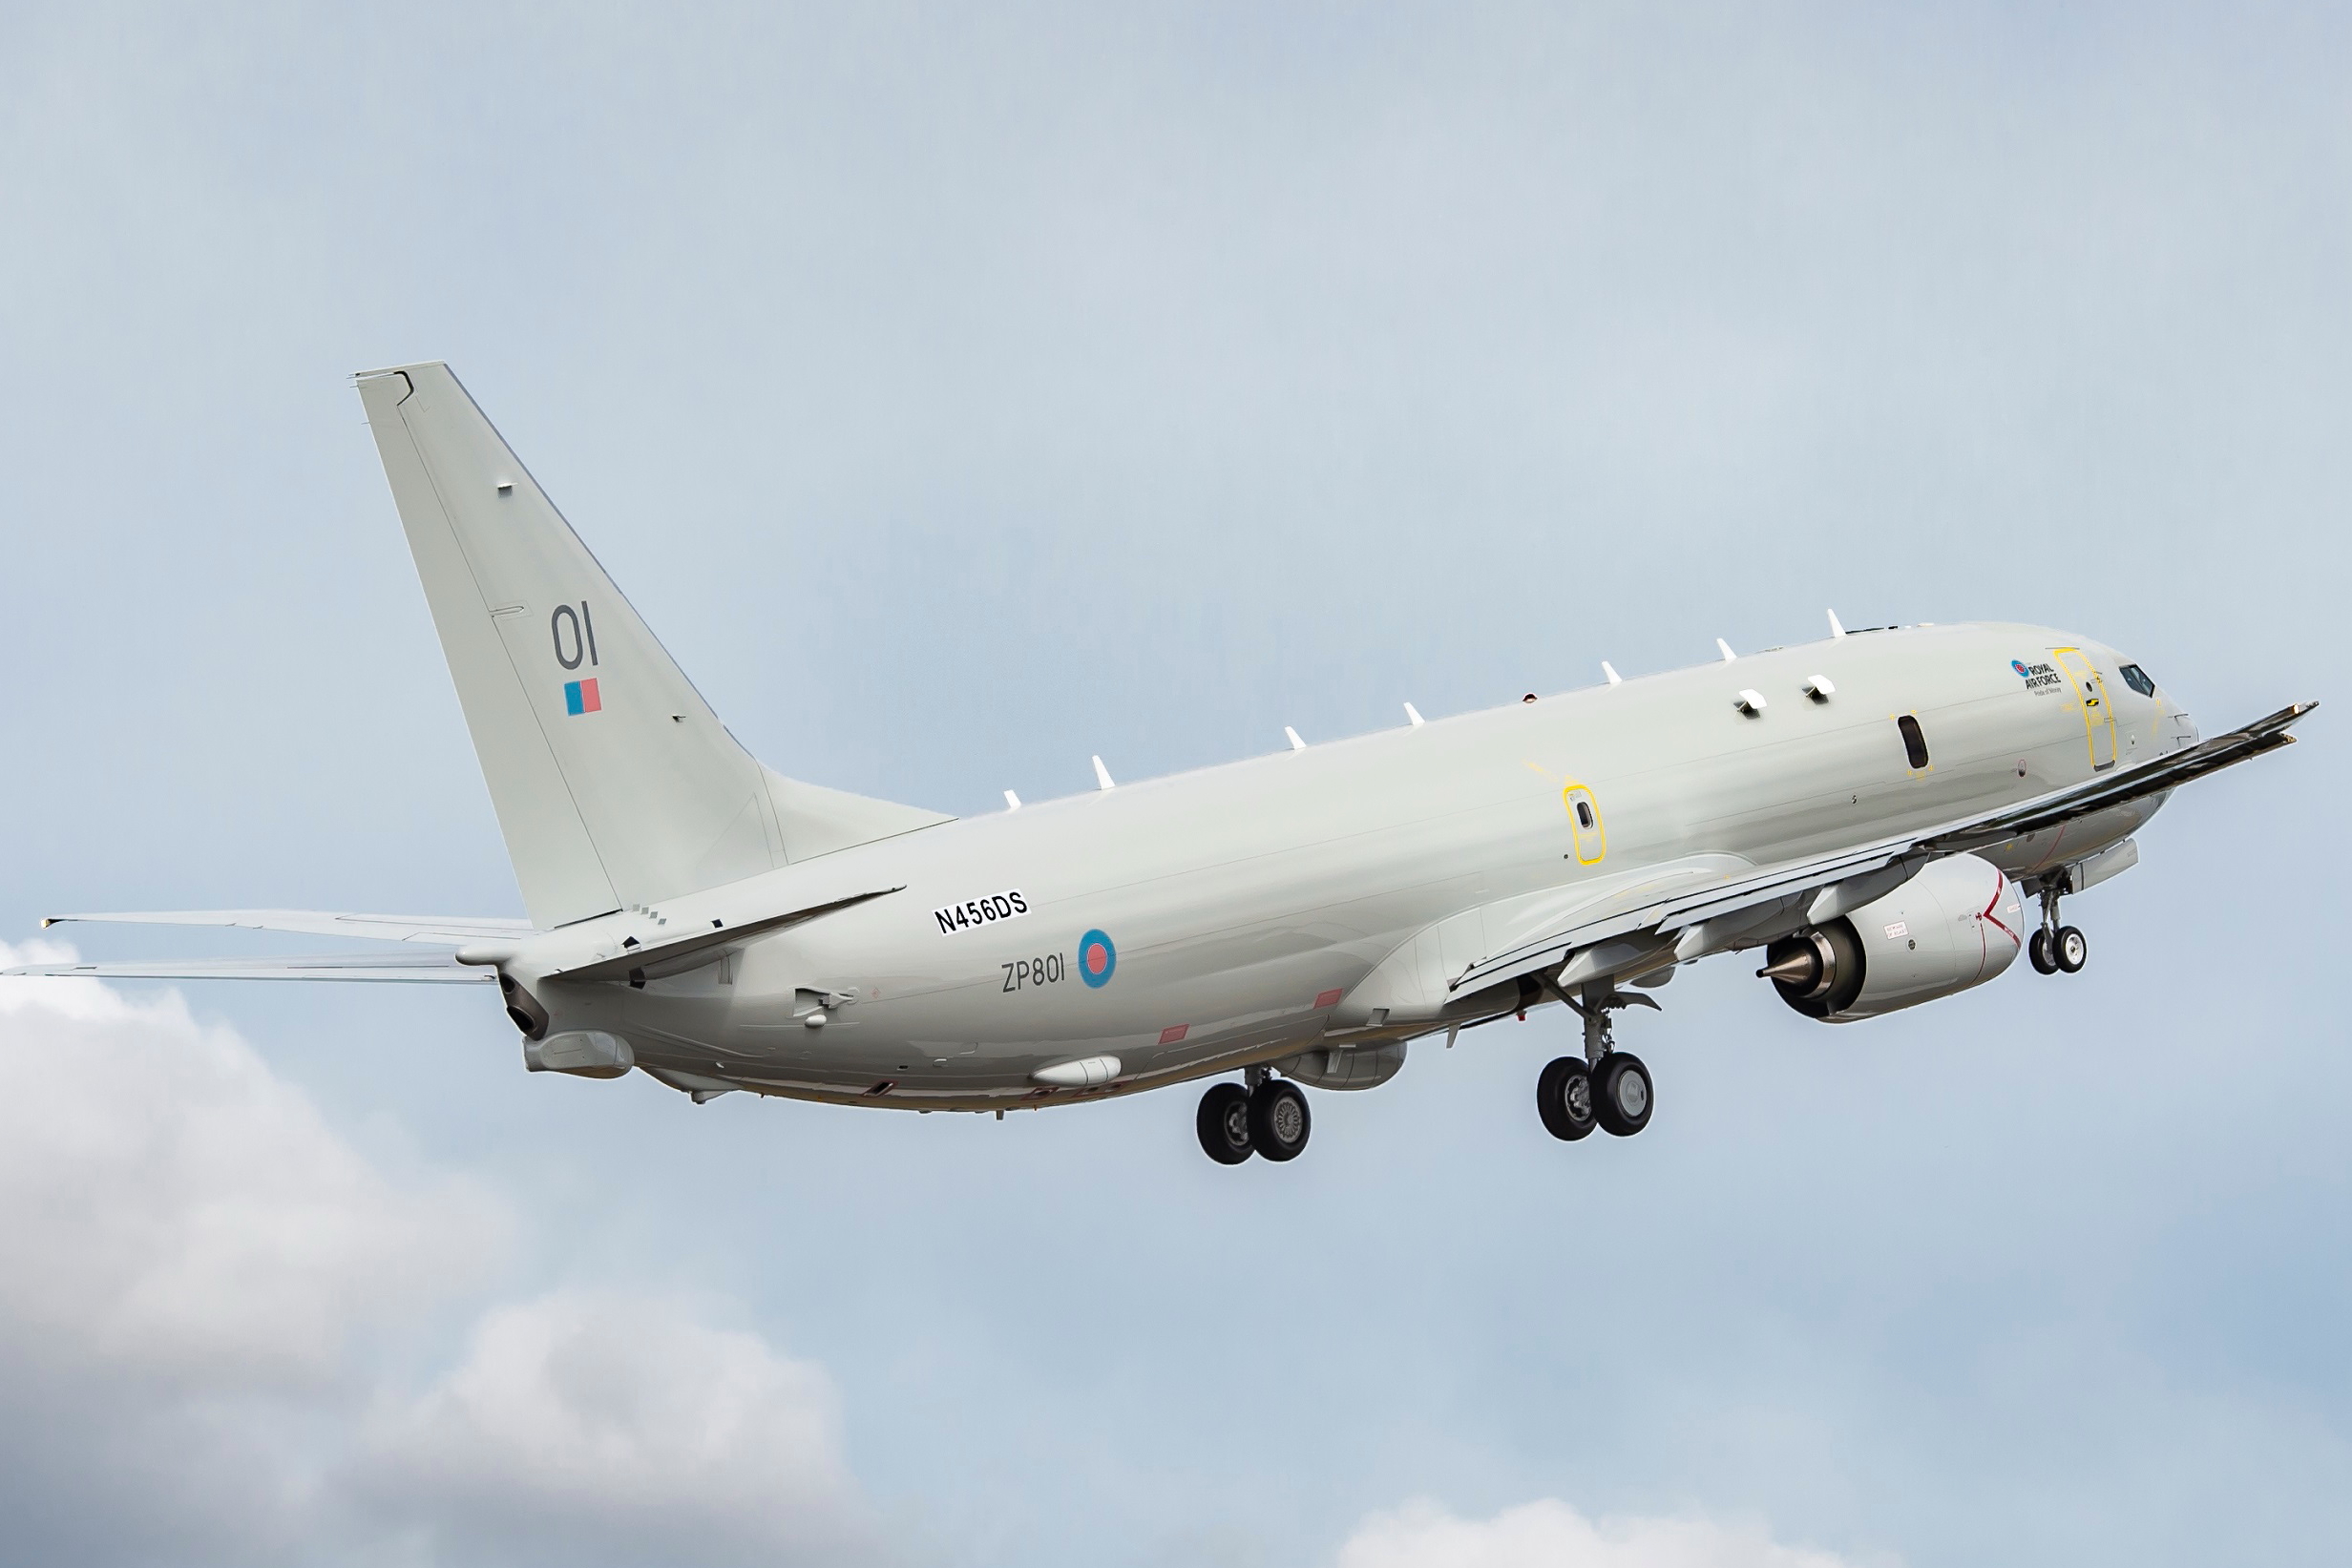 The first Boeing P-8A Poseidon for the United Kingdom Royal Air Force (RAF) took off from Renton, Wash in July 2019, marking the first flight of this inaugural UK P-8A. Read more: https://www.asiatraveltips.com/news19/177-BoeingP8APoseidonUK.shtml Click to enlarge.